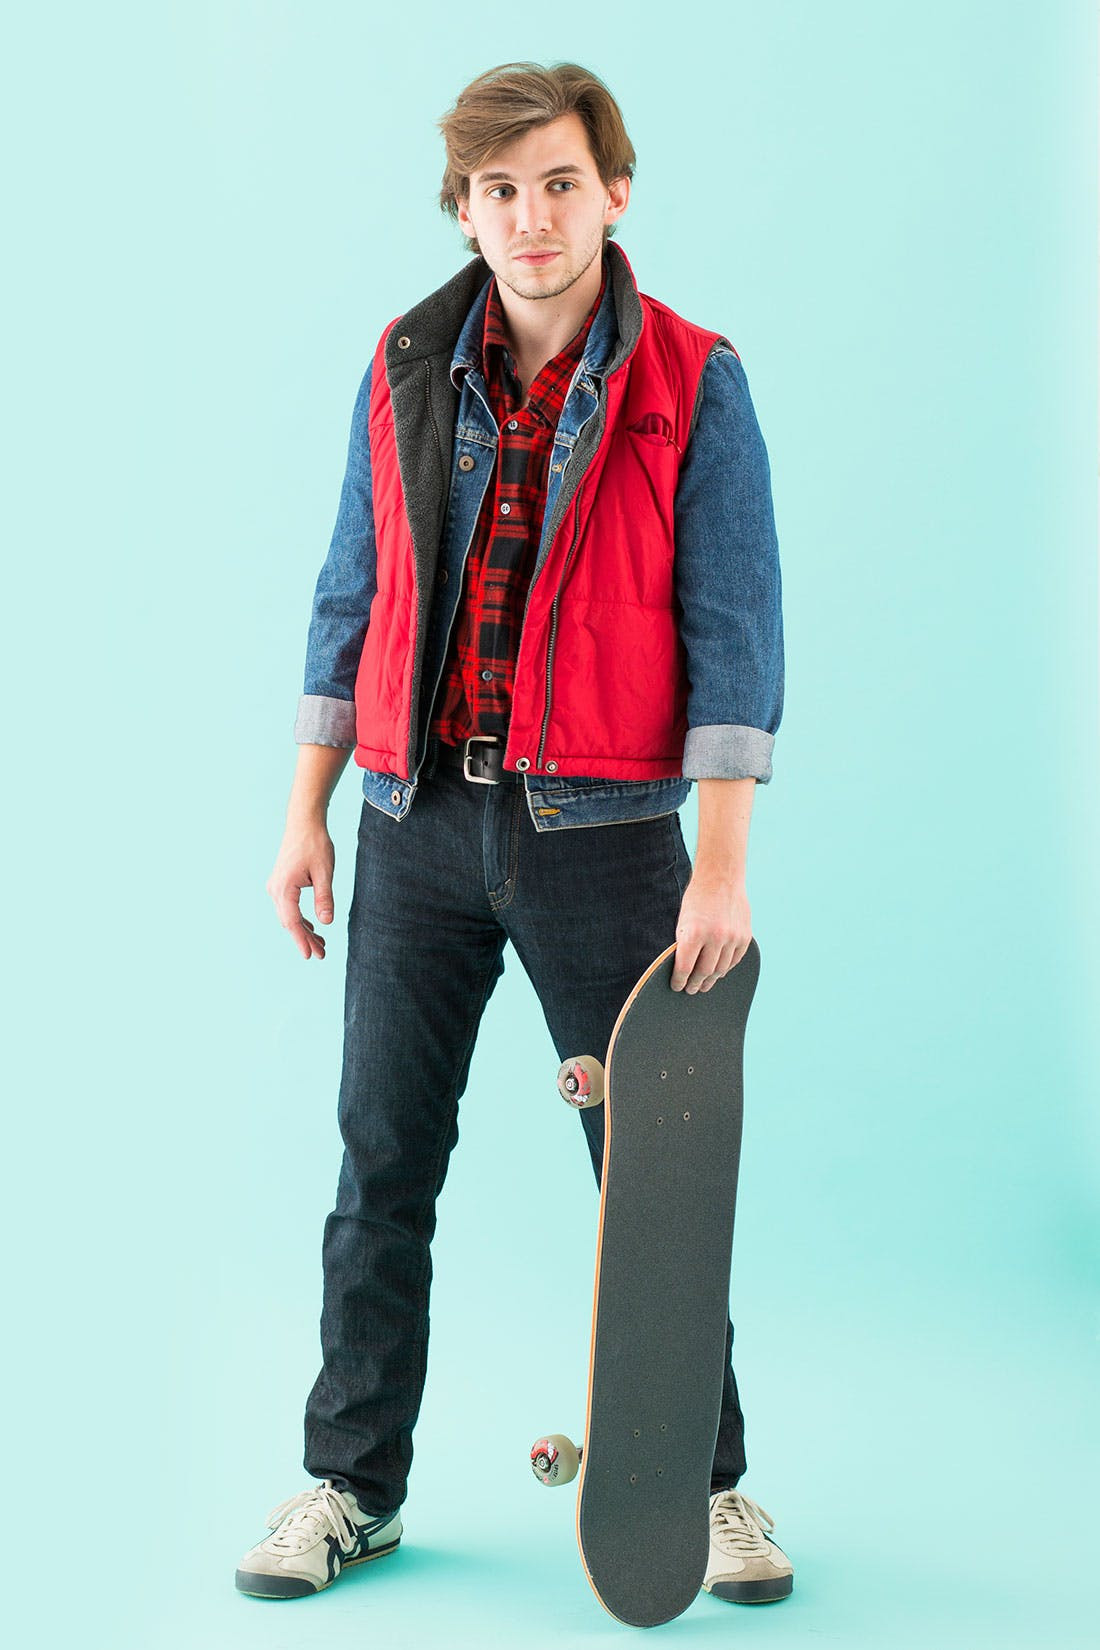 Easy DIY Halloween Costumes For Men
 How to Turn 1 Flannel Shirt into 6 Halloween Costumes